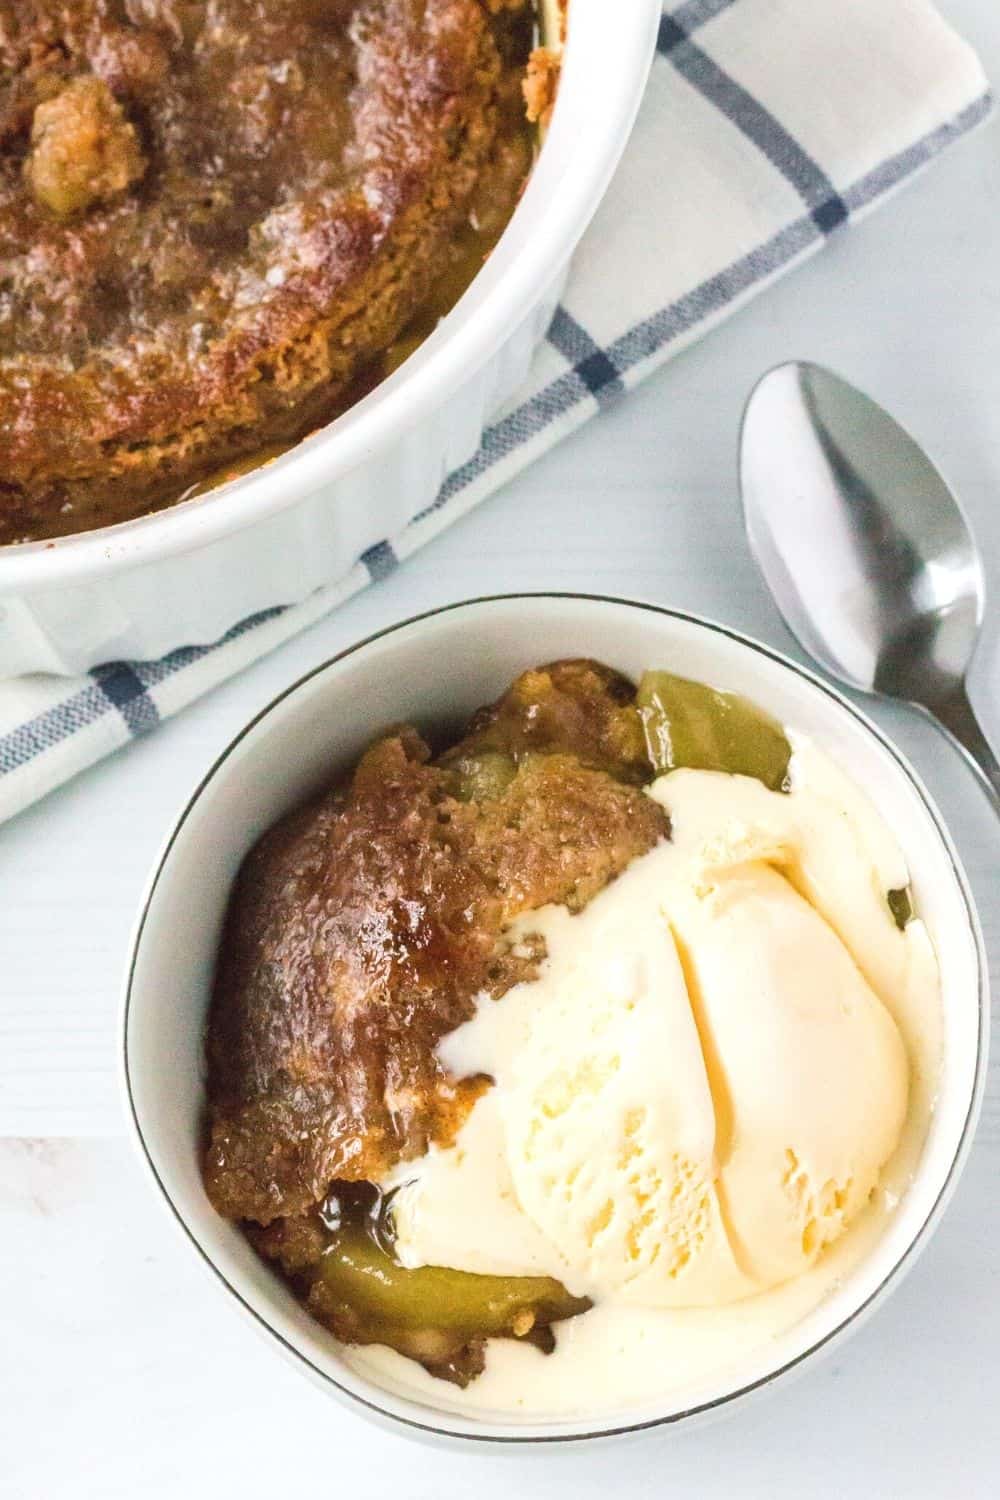 a scoop of vanilla ice cream melts over a serving of apple dump cake cooked in the Instant Pot